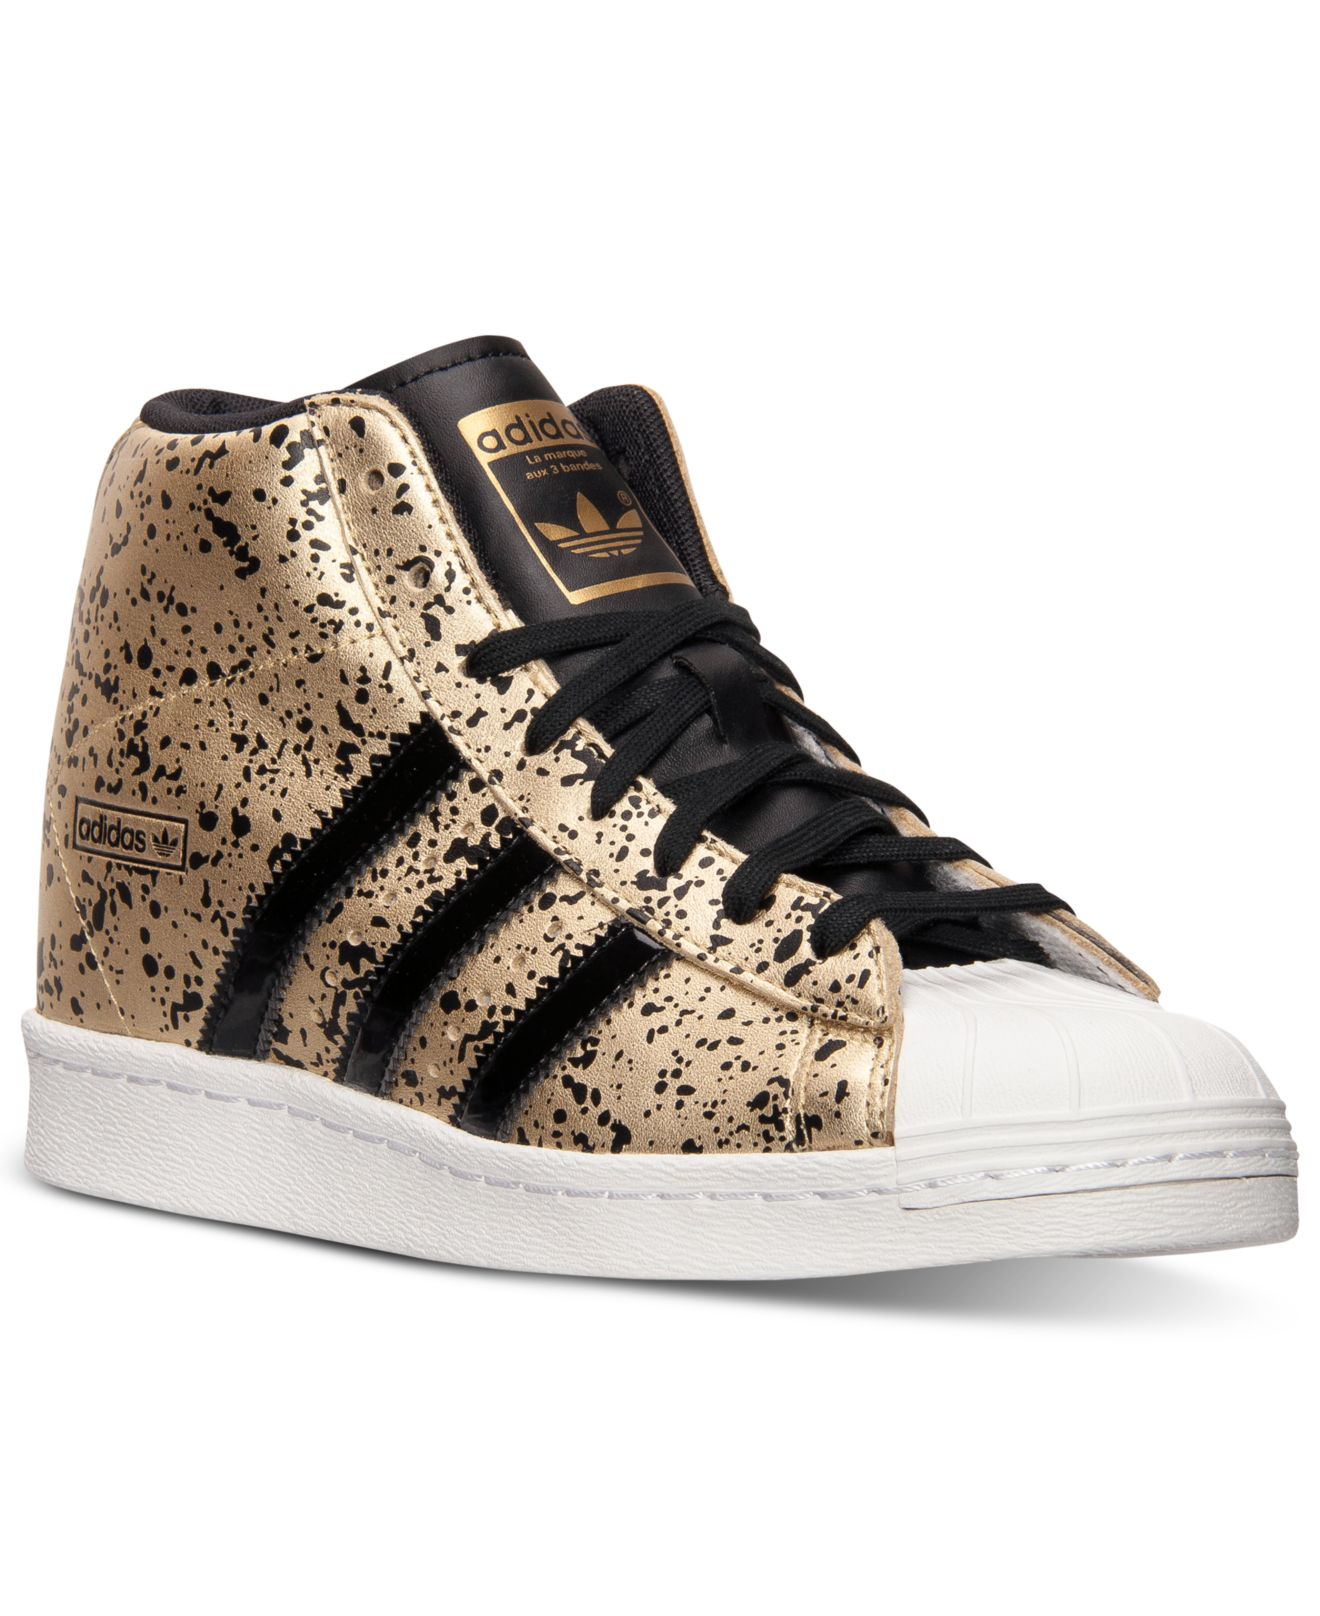 adidas Women'S Superstar Up Casual Sneakers From Finish Line in Gold  Metallic/Black/White (Metallic) | Lyst